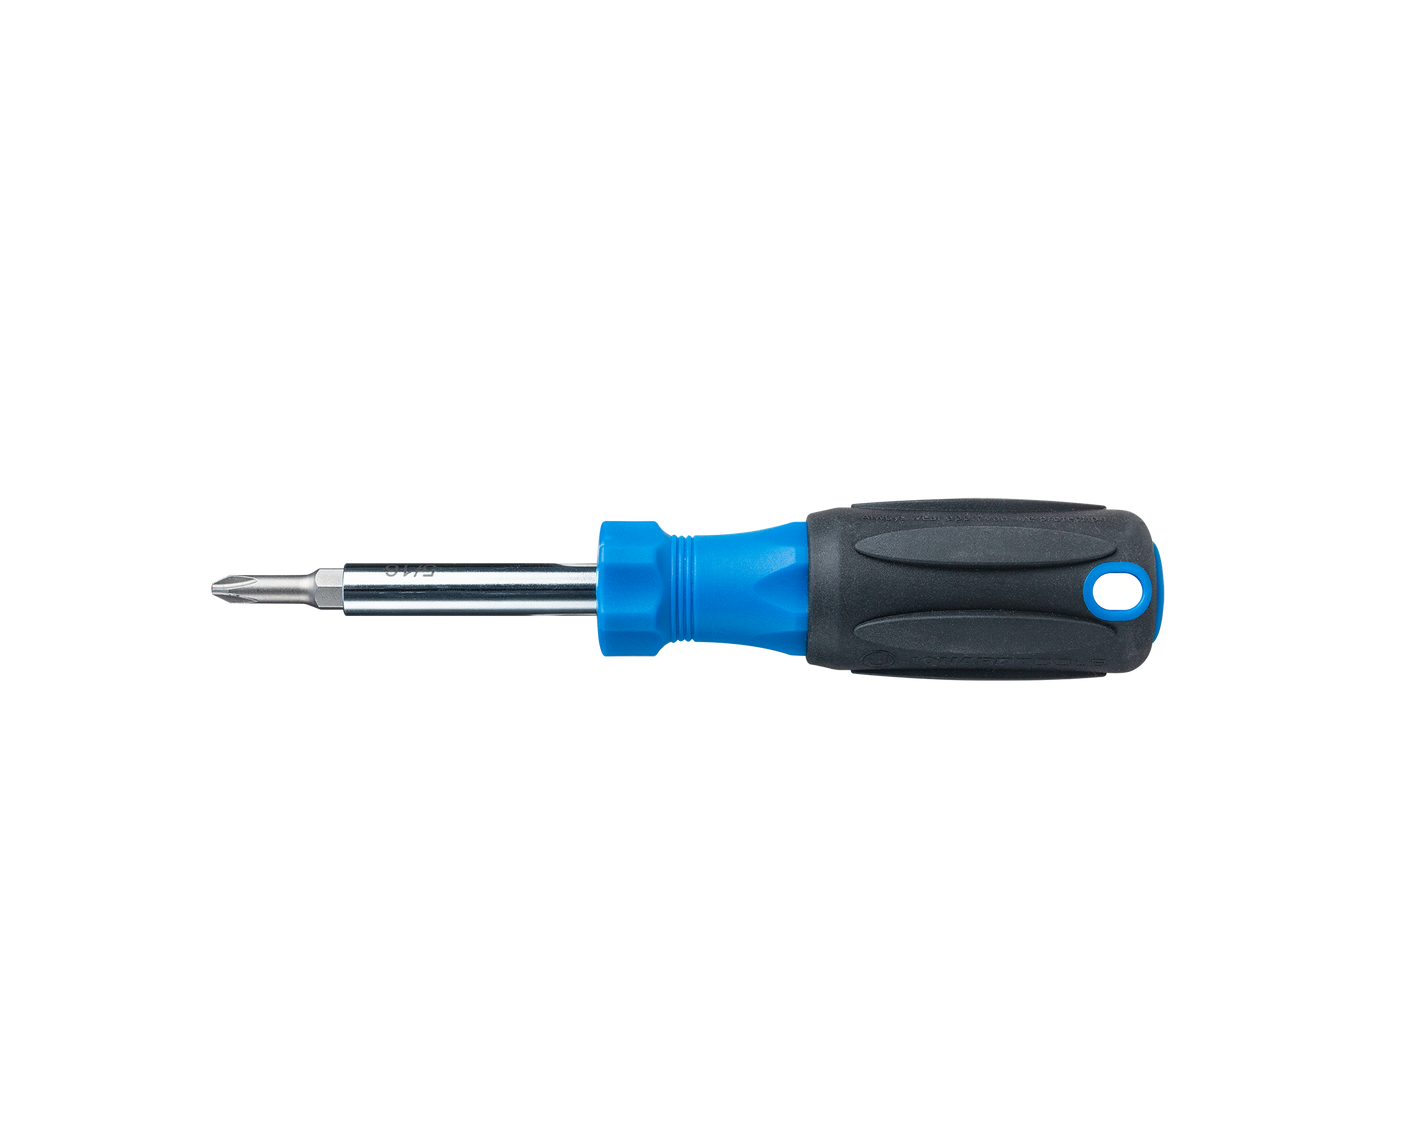 SD-61: 6-in-1 Multi-Bit Screwdriver with Phillips and Slotted Bits, Jonard